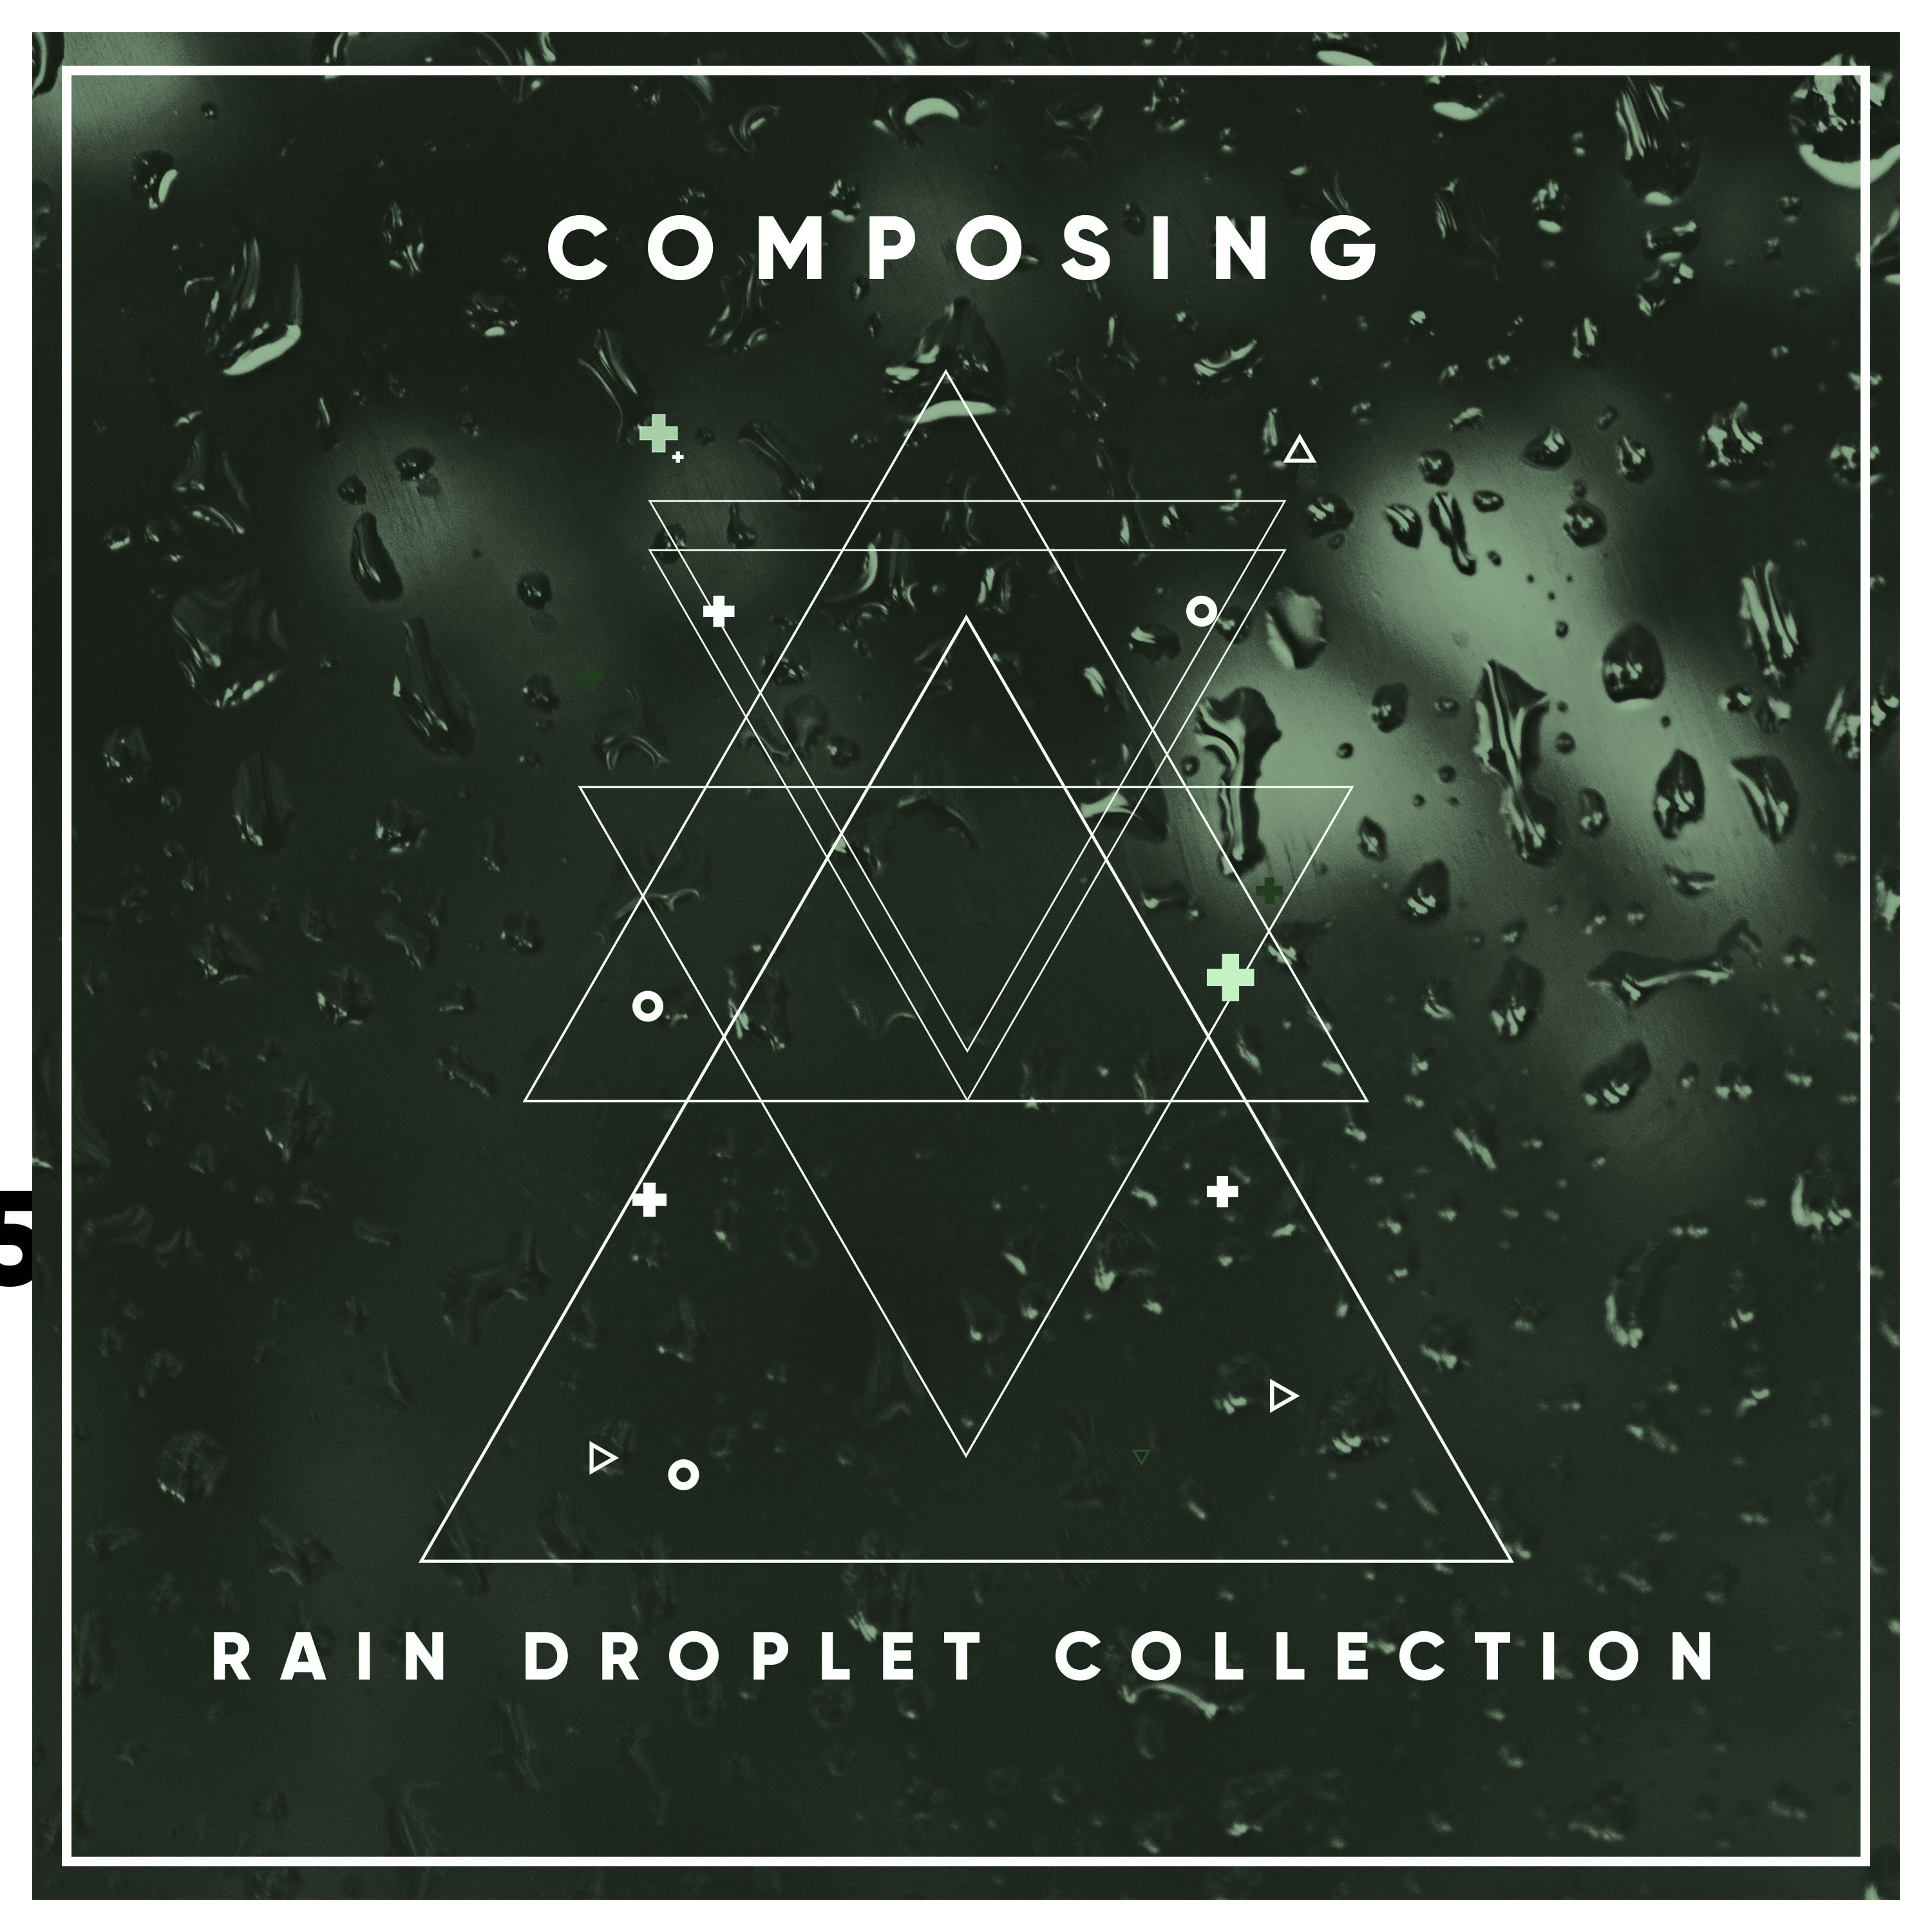 #1 Hour of Composing Rain Droplet Collection